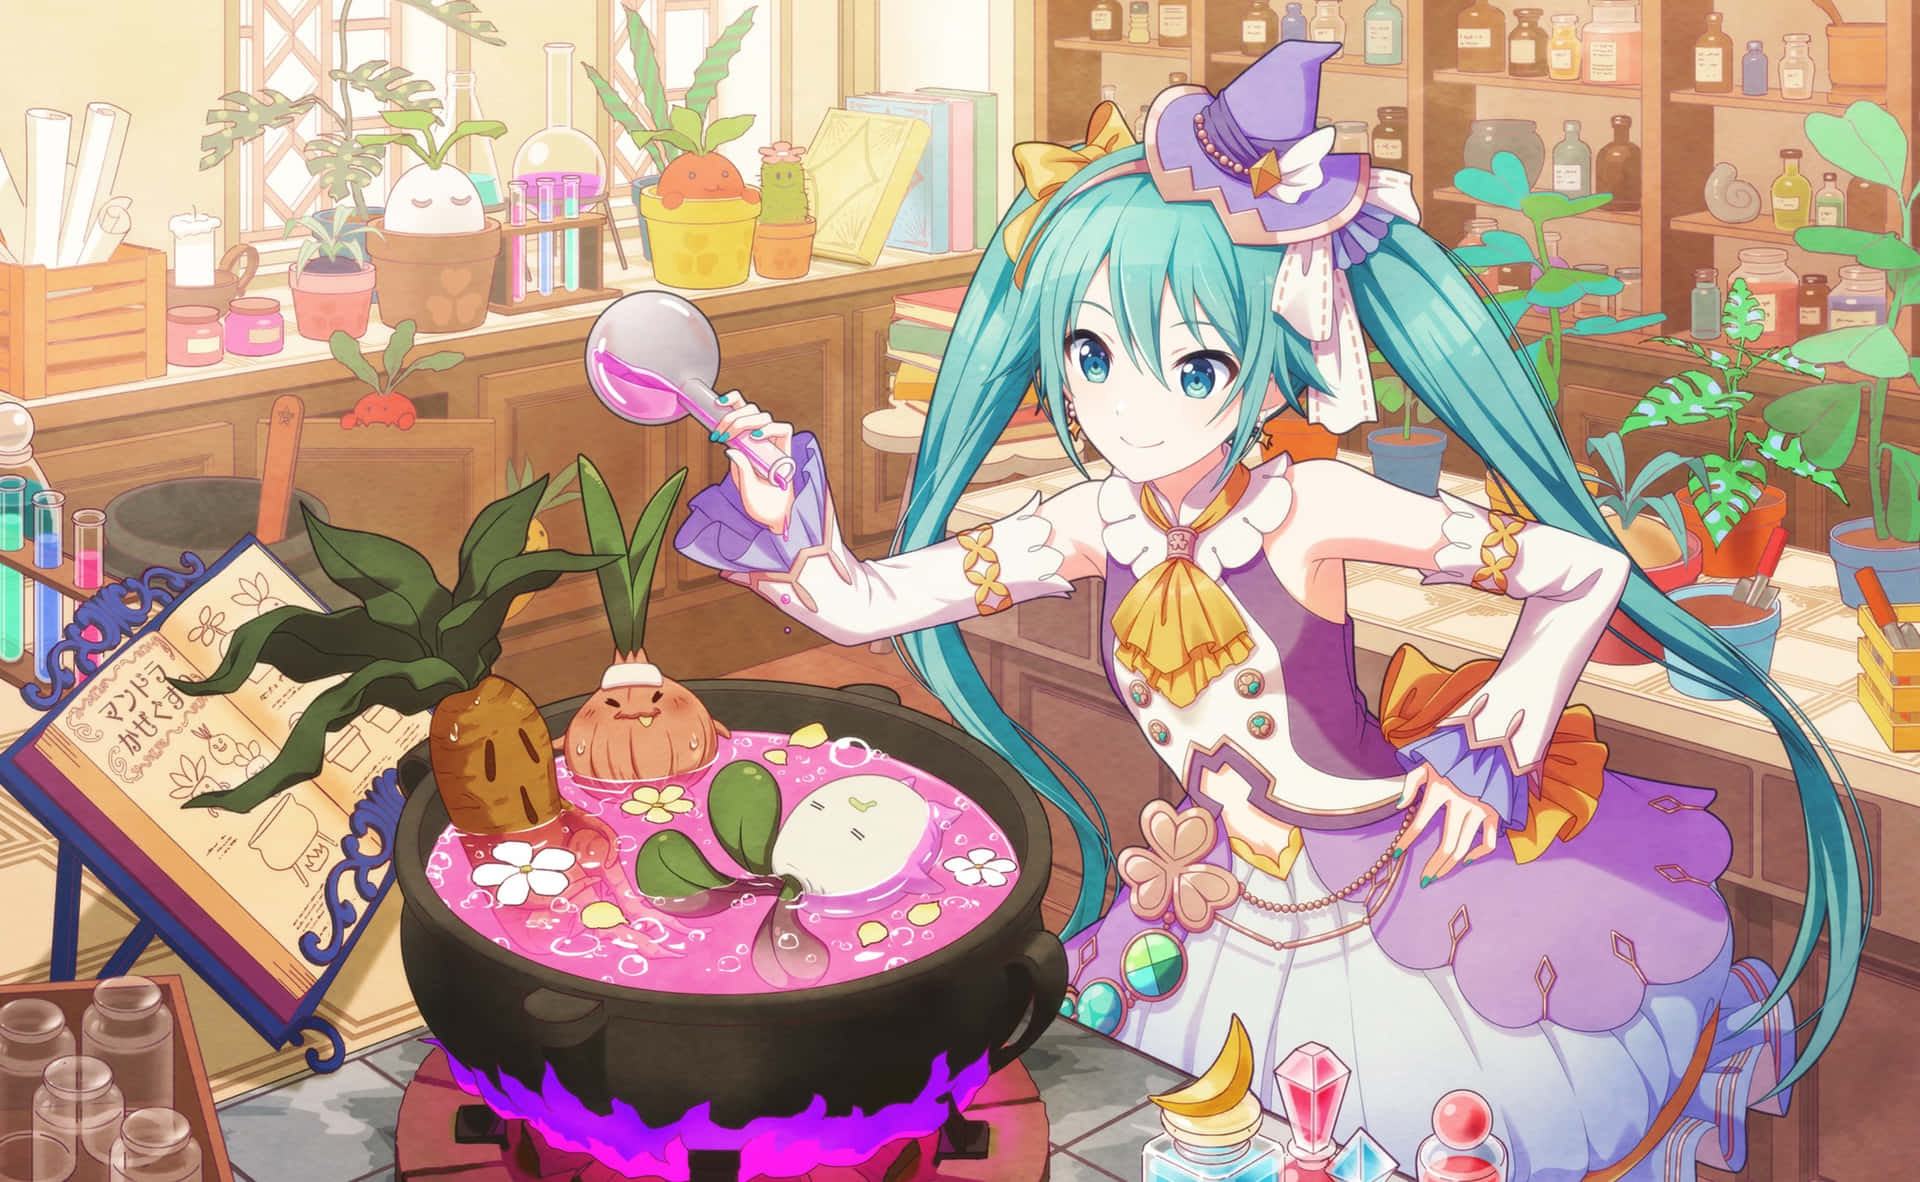 Magical Potion Creation Anime Style Wallpaper